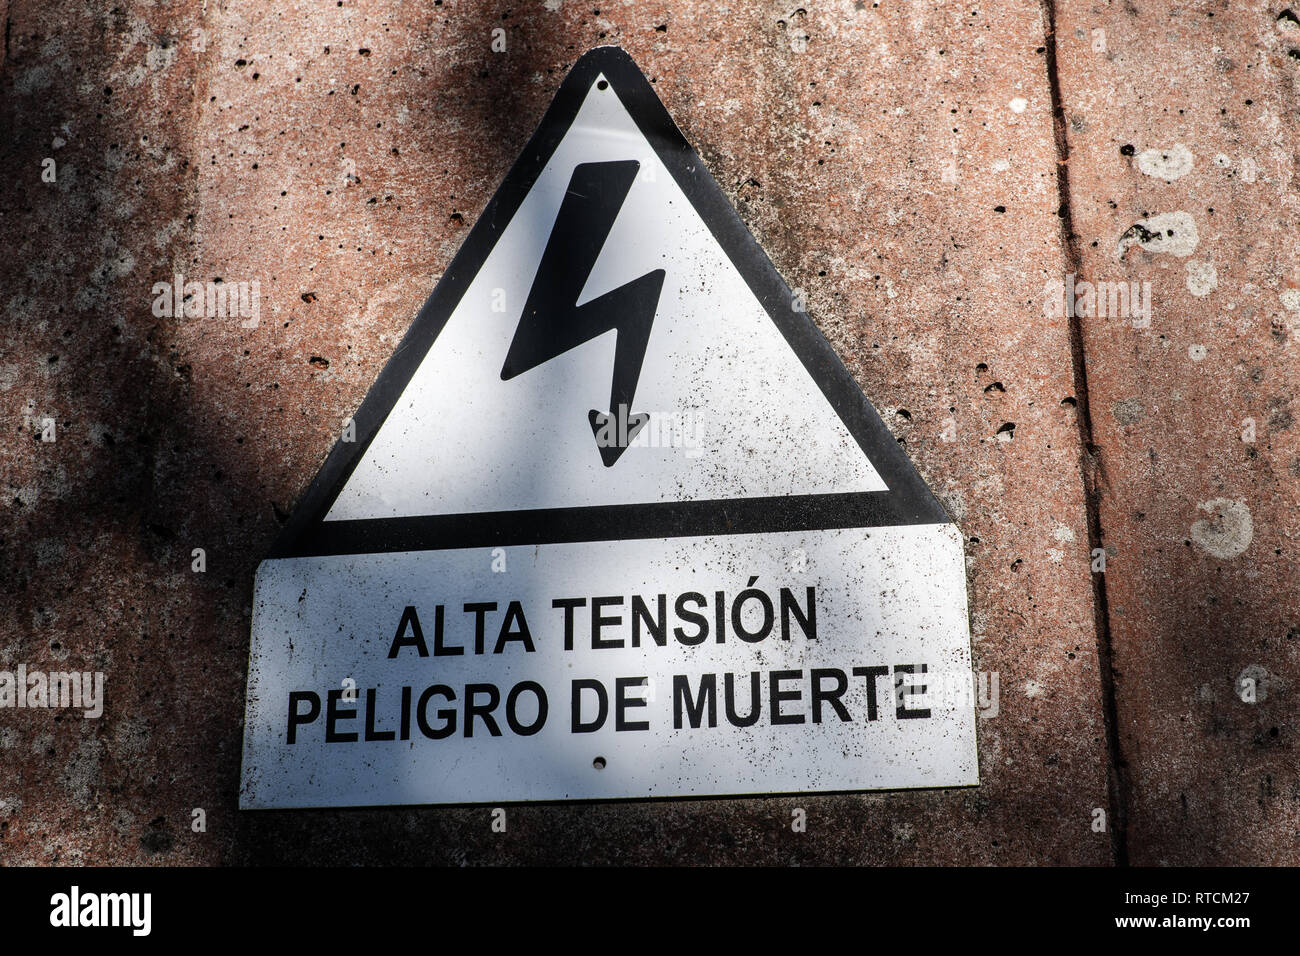 Electrocution sign warning of the danger of electrocution.Spanish text 'High voltage Risk of death' Stock Photo